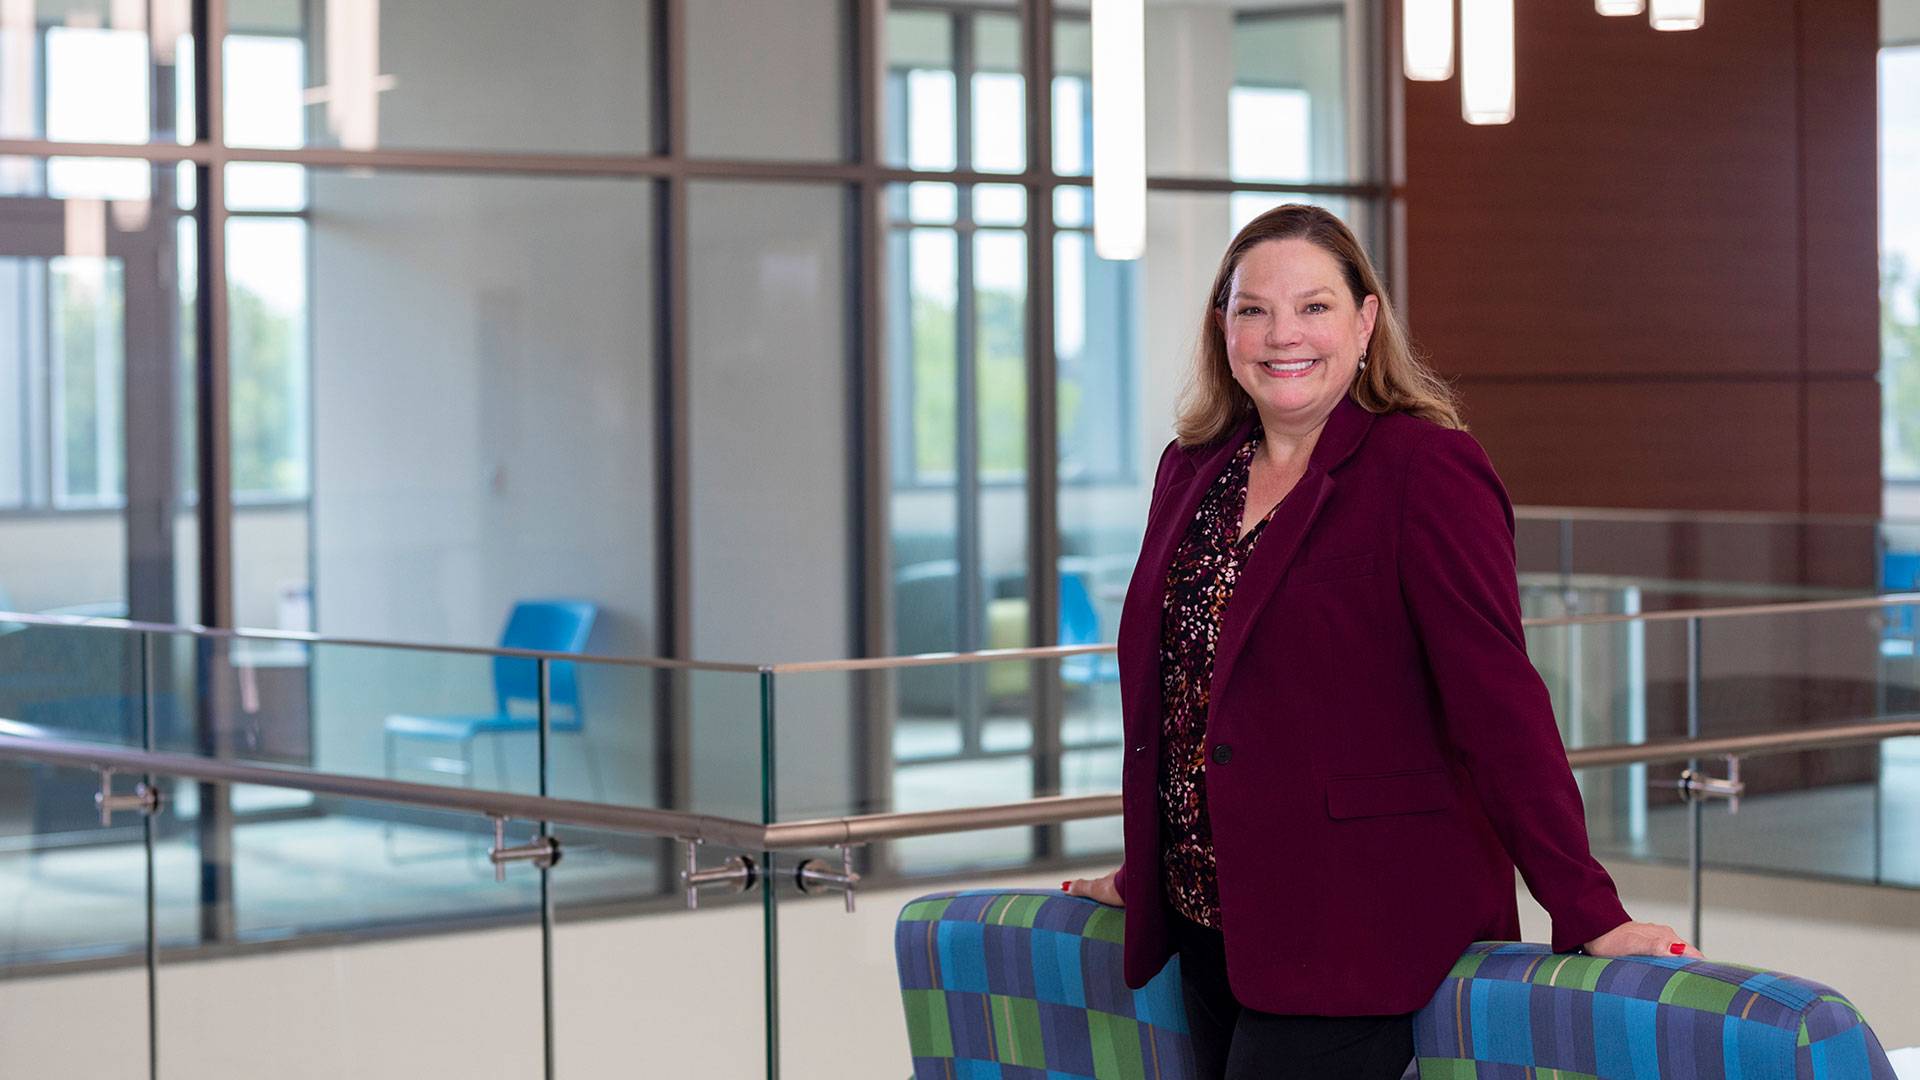 Beth Lewis named UHCL Pearland chief operations officer